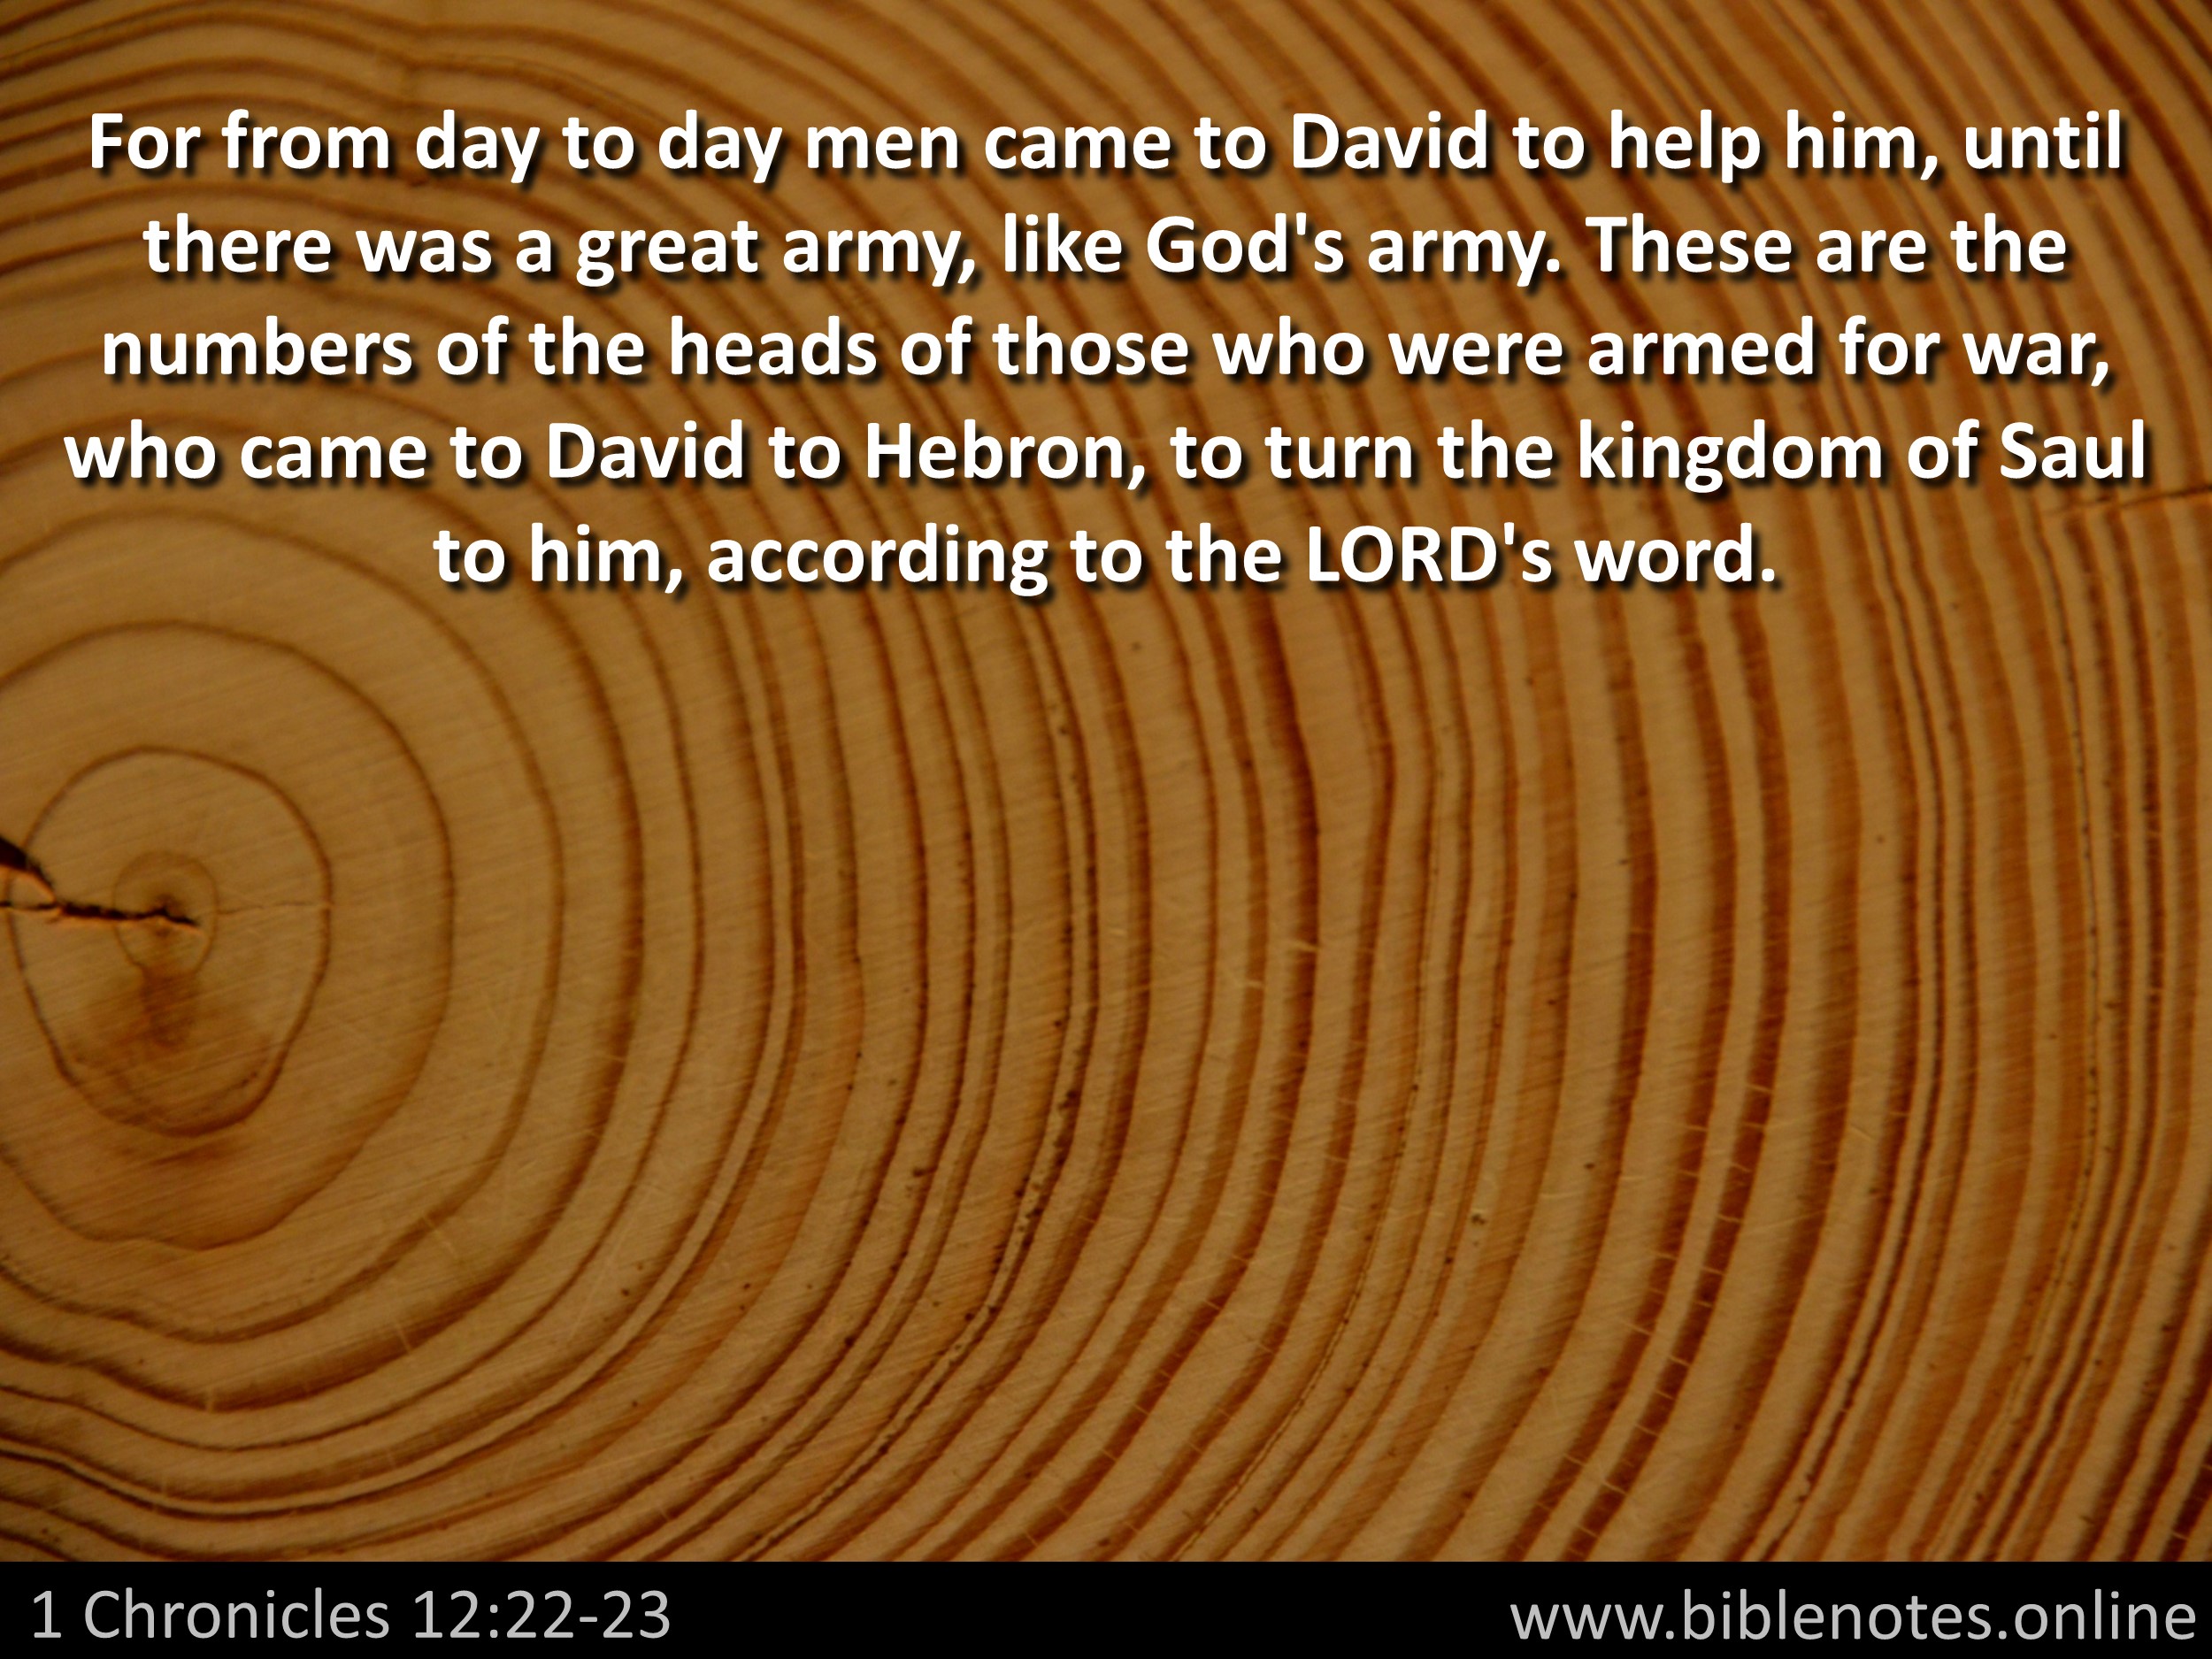 Bible Verse from 1 Chronicles Chapter 12